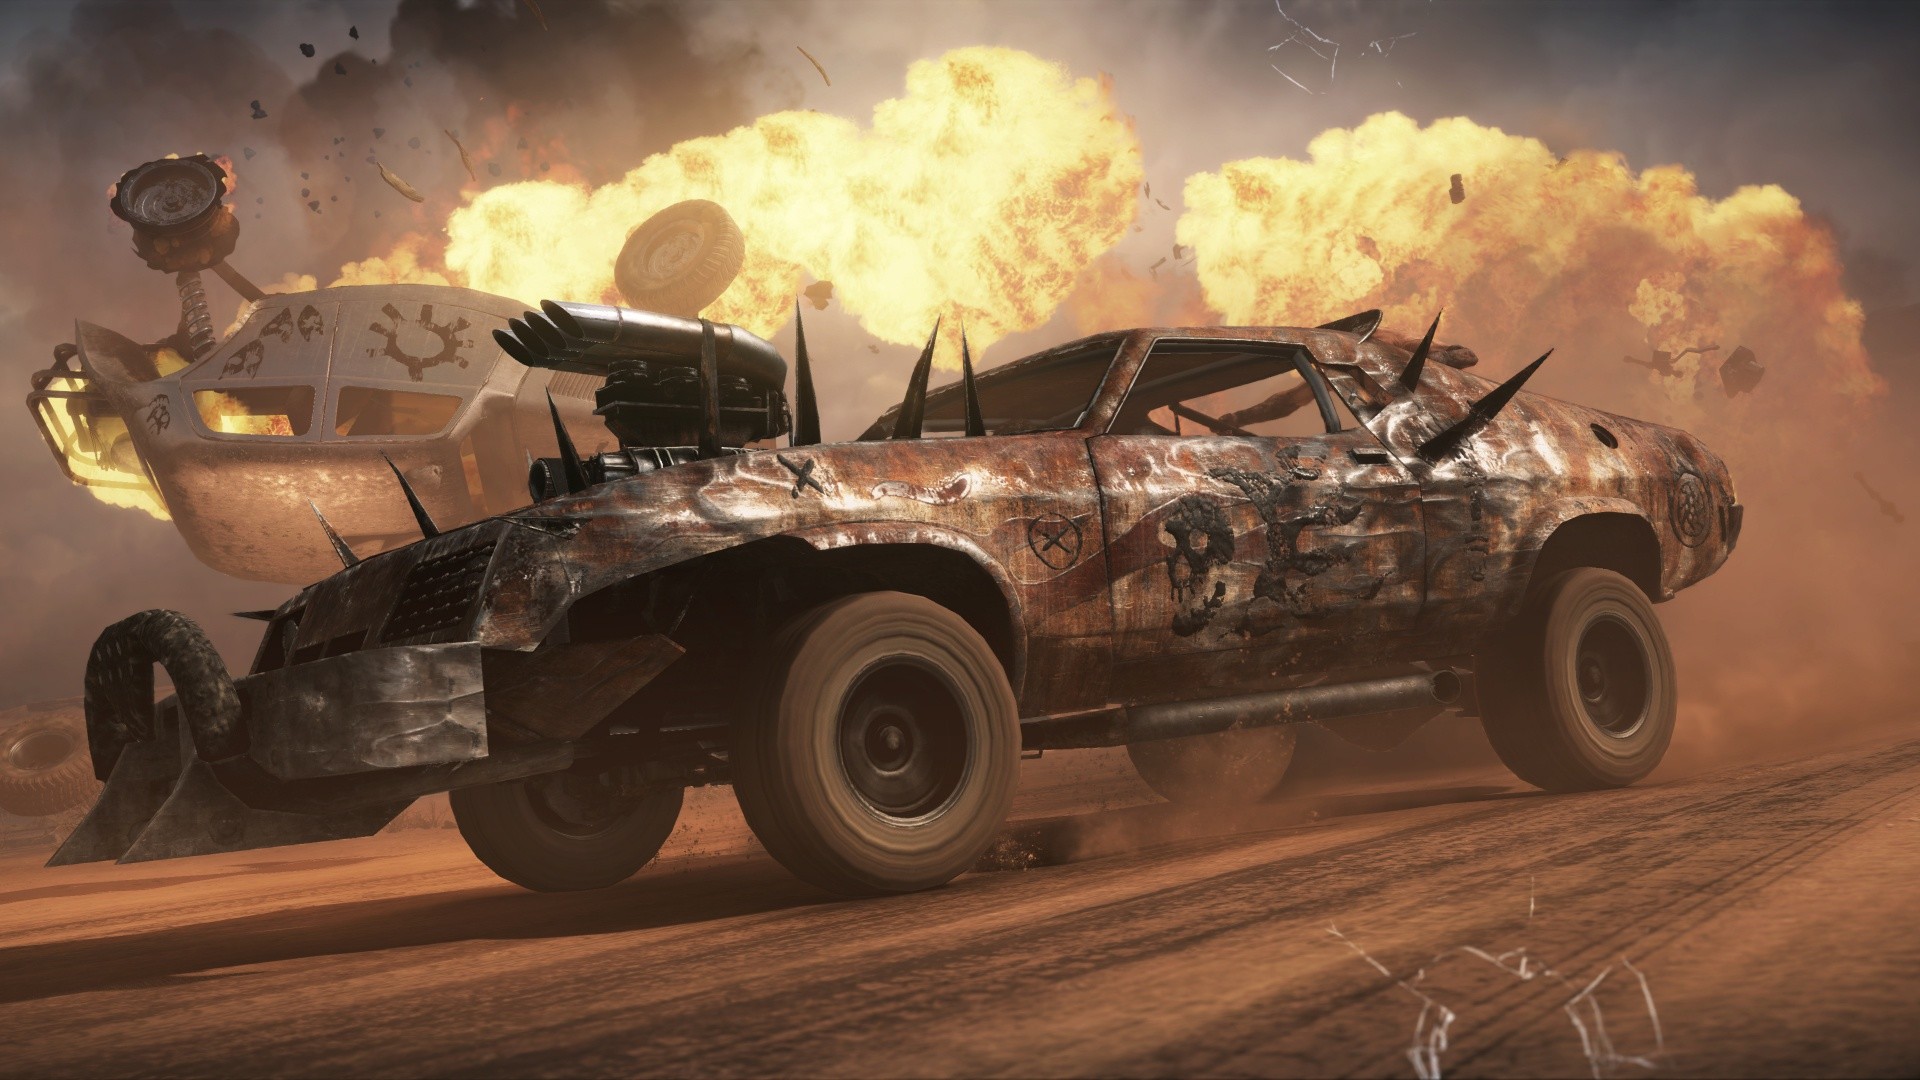 1920x1080 Mad Max Wallpapers Hd